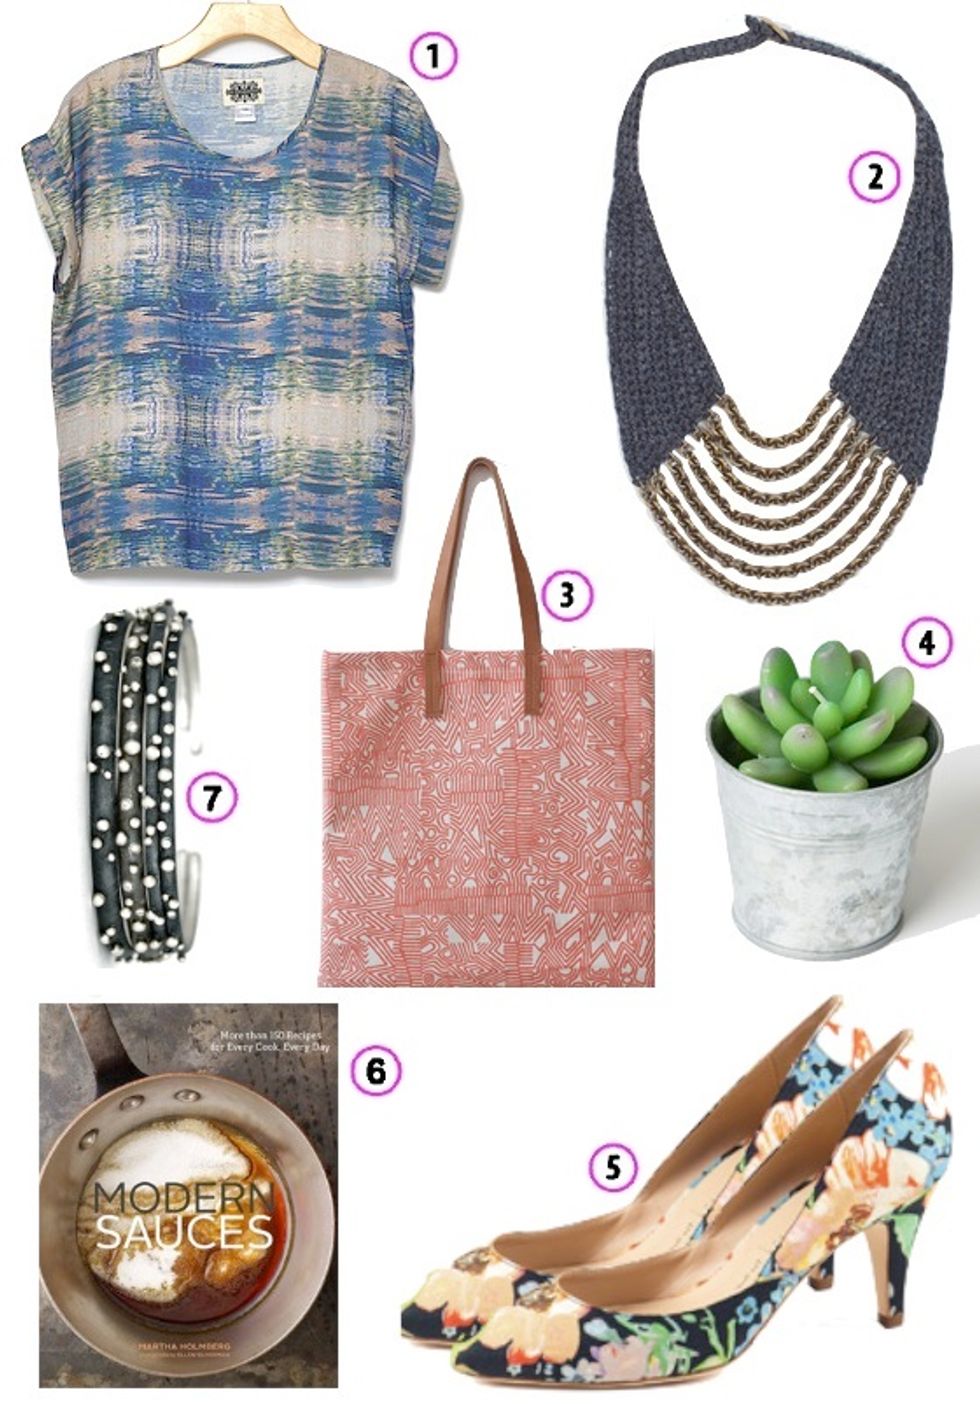 Look of the Week: Chic Gifts for Mom from Local Boutiques